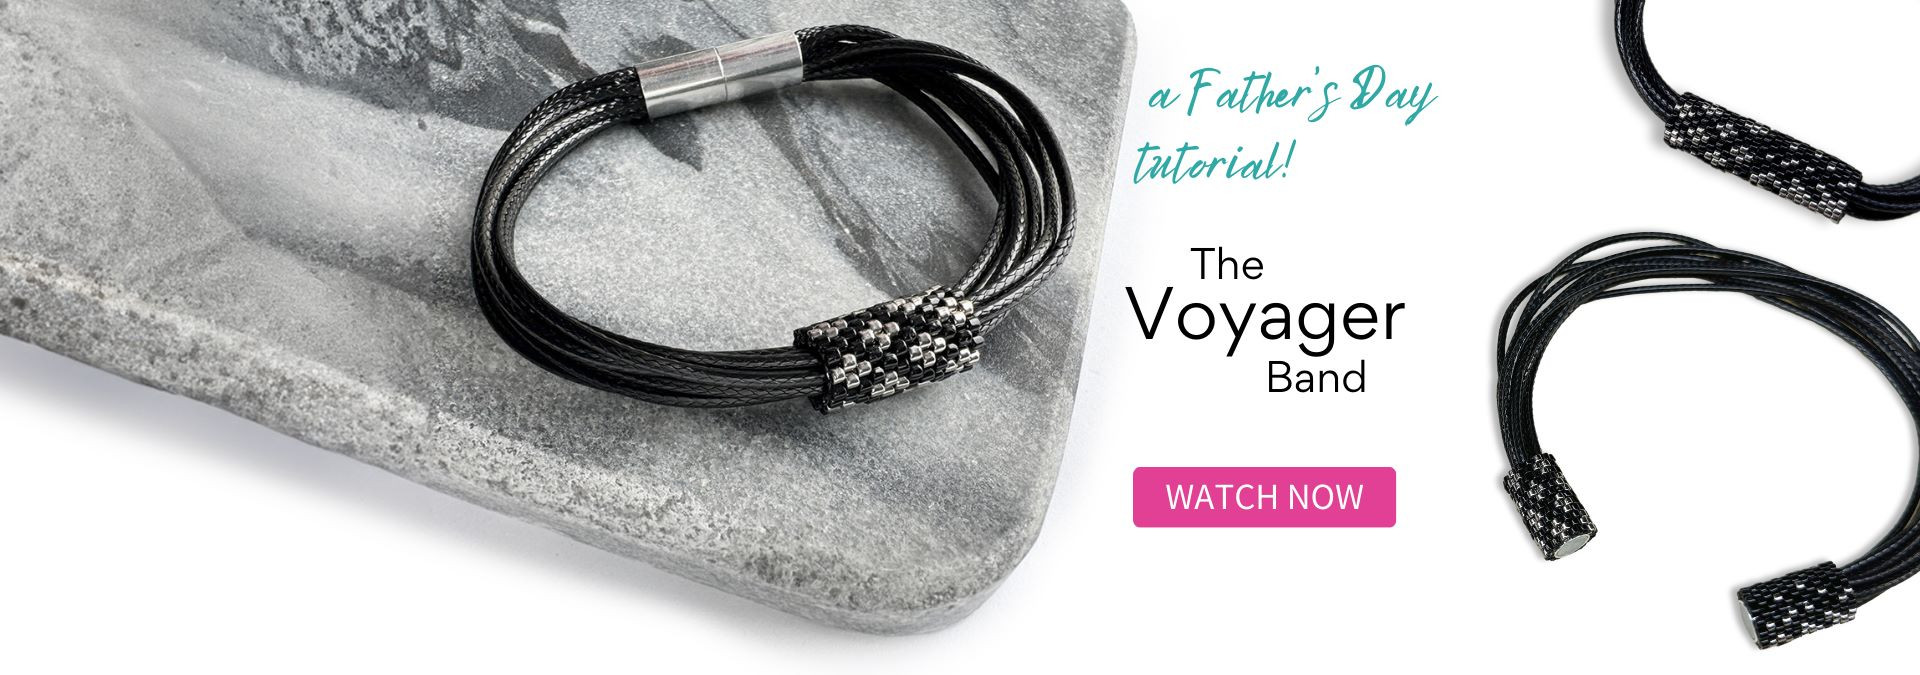 Make a classy masculine bracelet for your dad this Father's Day!